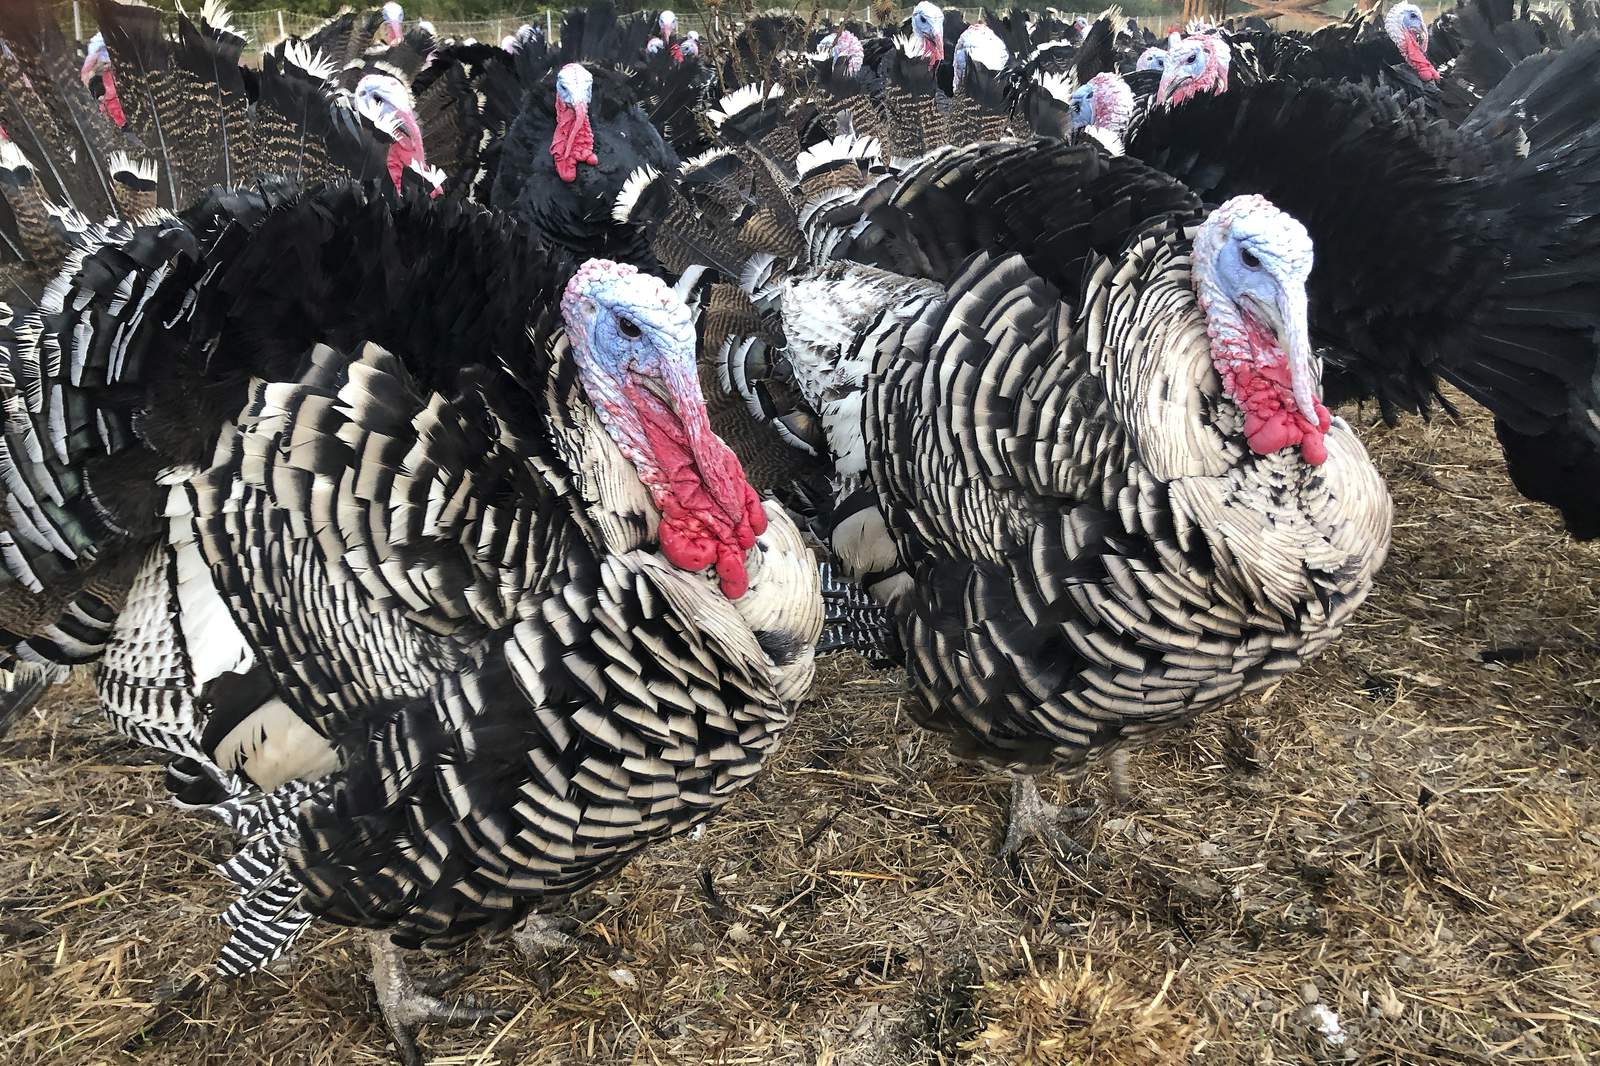 Scaled-back Thanksgiving plans leave turkey farmers in limbo